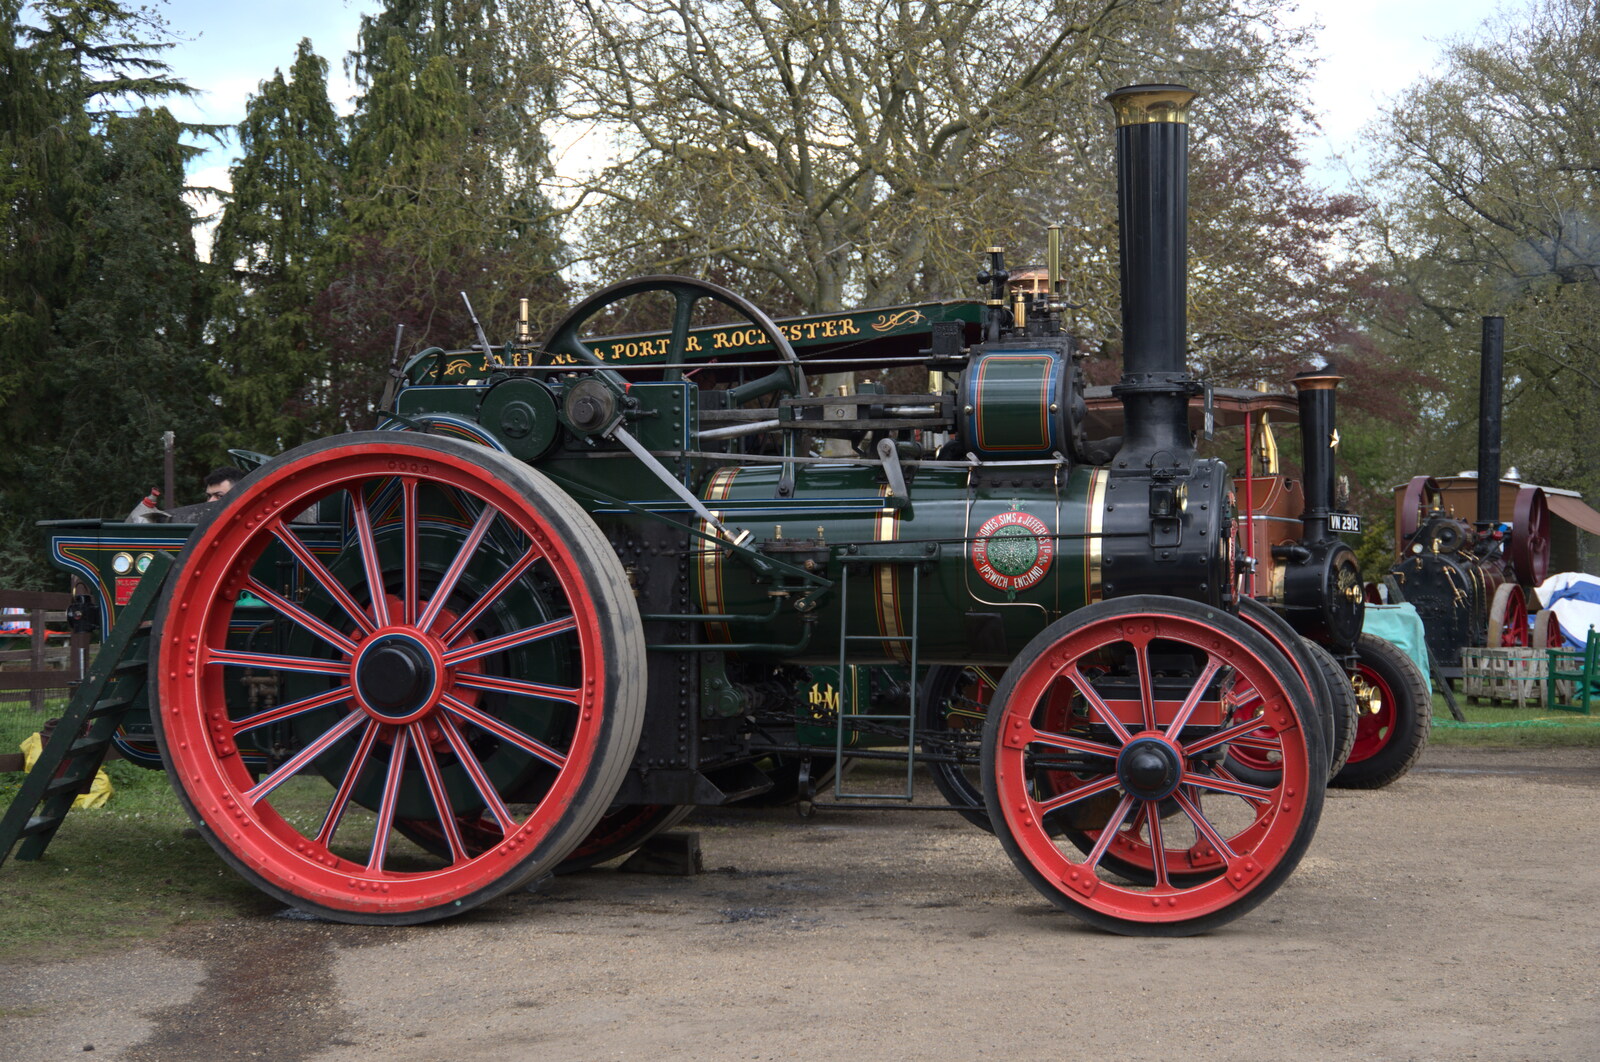 The Ransomes, Simms and Jeffries engine from The Heritage Steam Gala, Bressingham Steam Museum, Norfolk - 1st May 2023